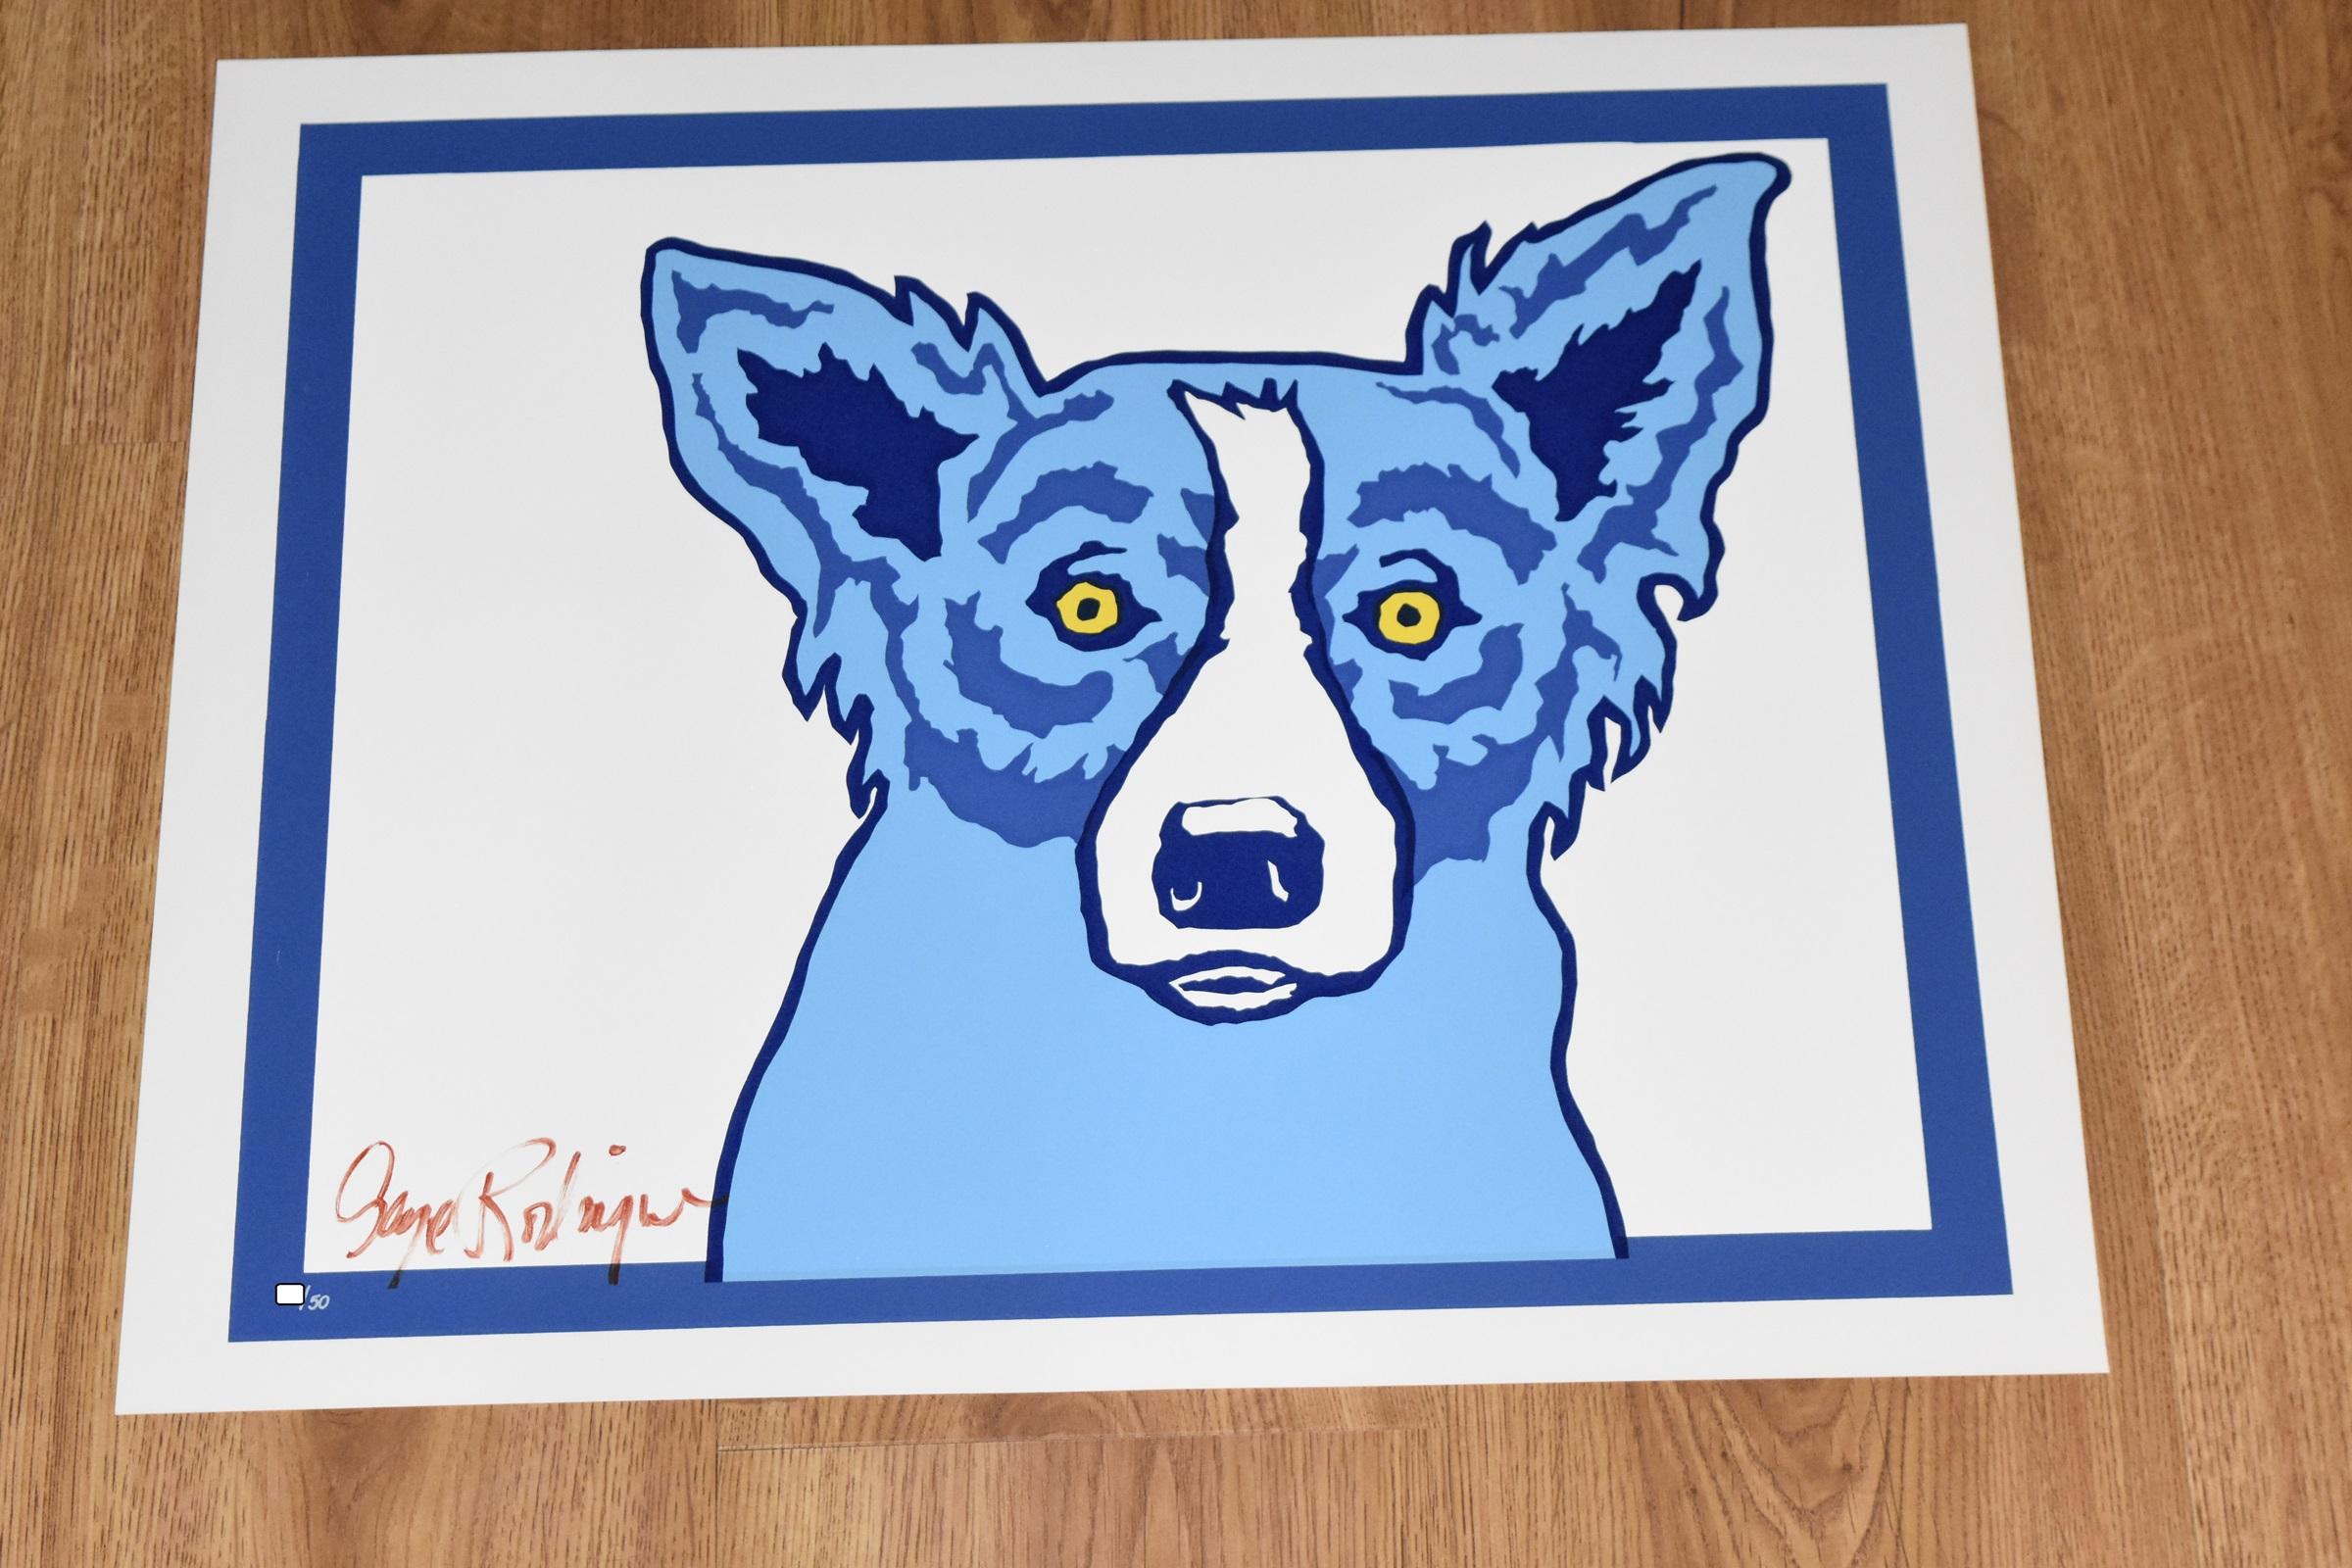 This Blue Dog work consists of one blue dog sitting on a white background with a blue frame line around the dog. The dog has soulful yellow eyes.  This pop art animal original silkscreen print on paper is hand signed by the artist.

Artist:  George